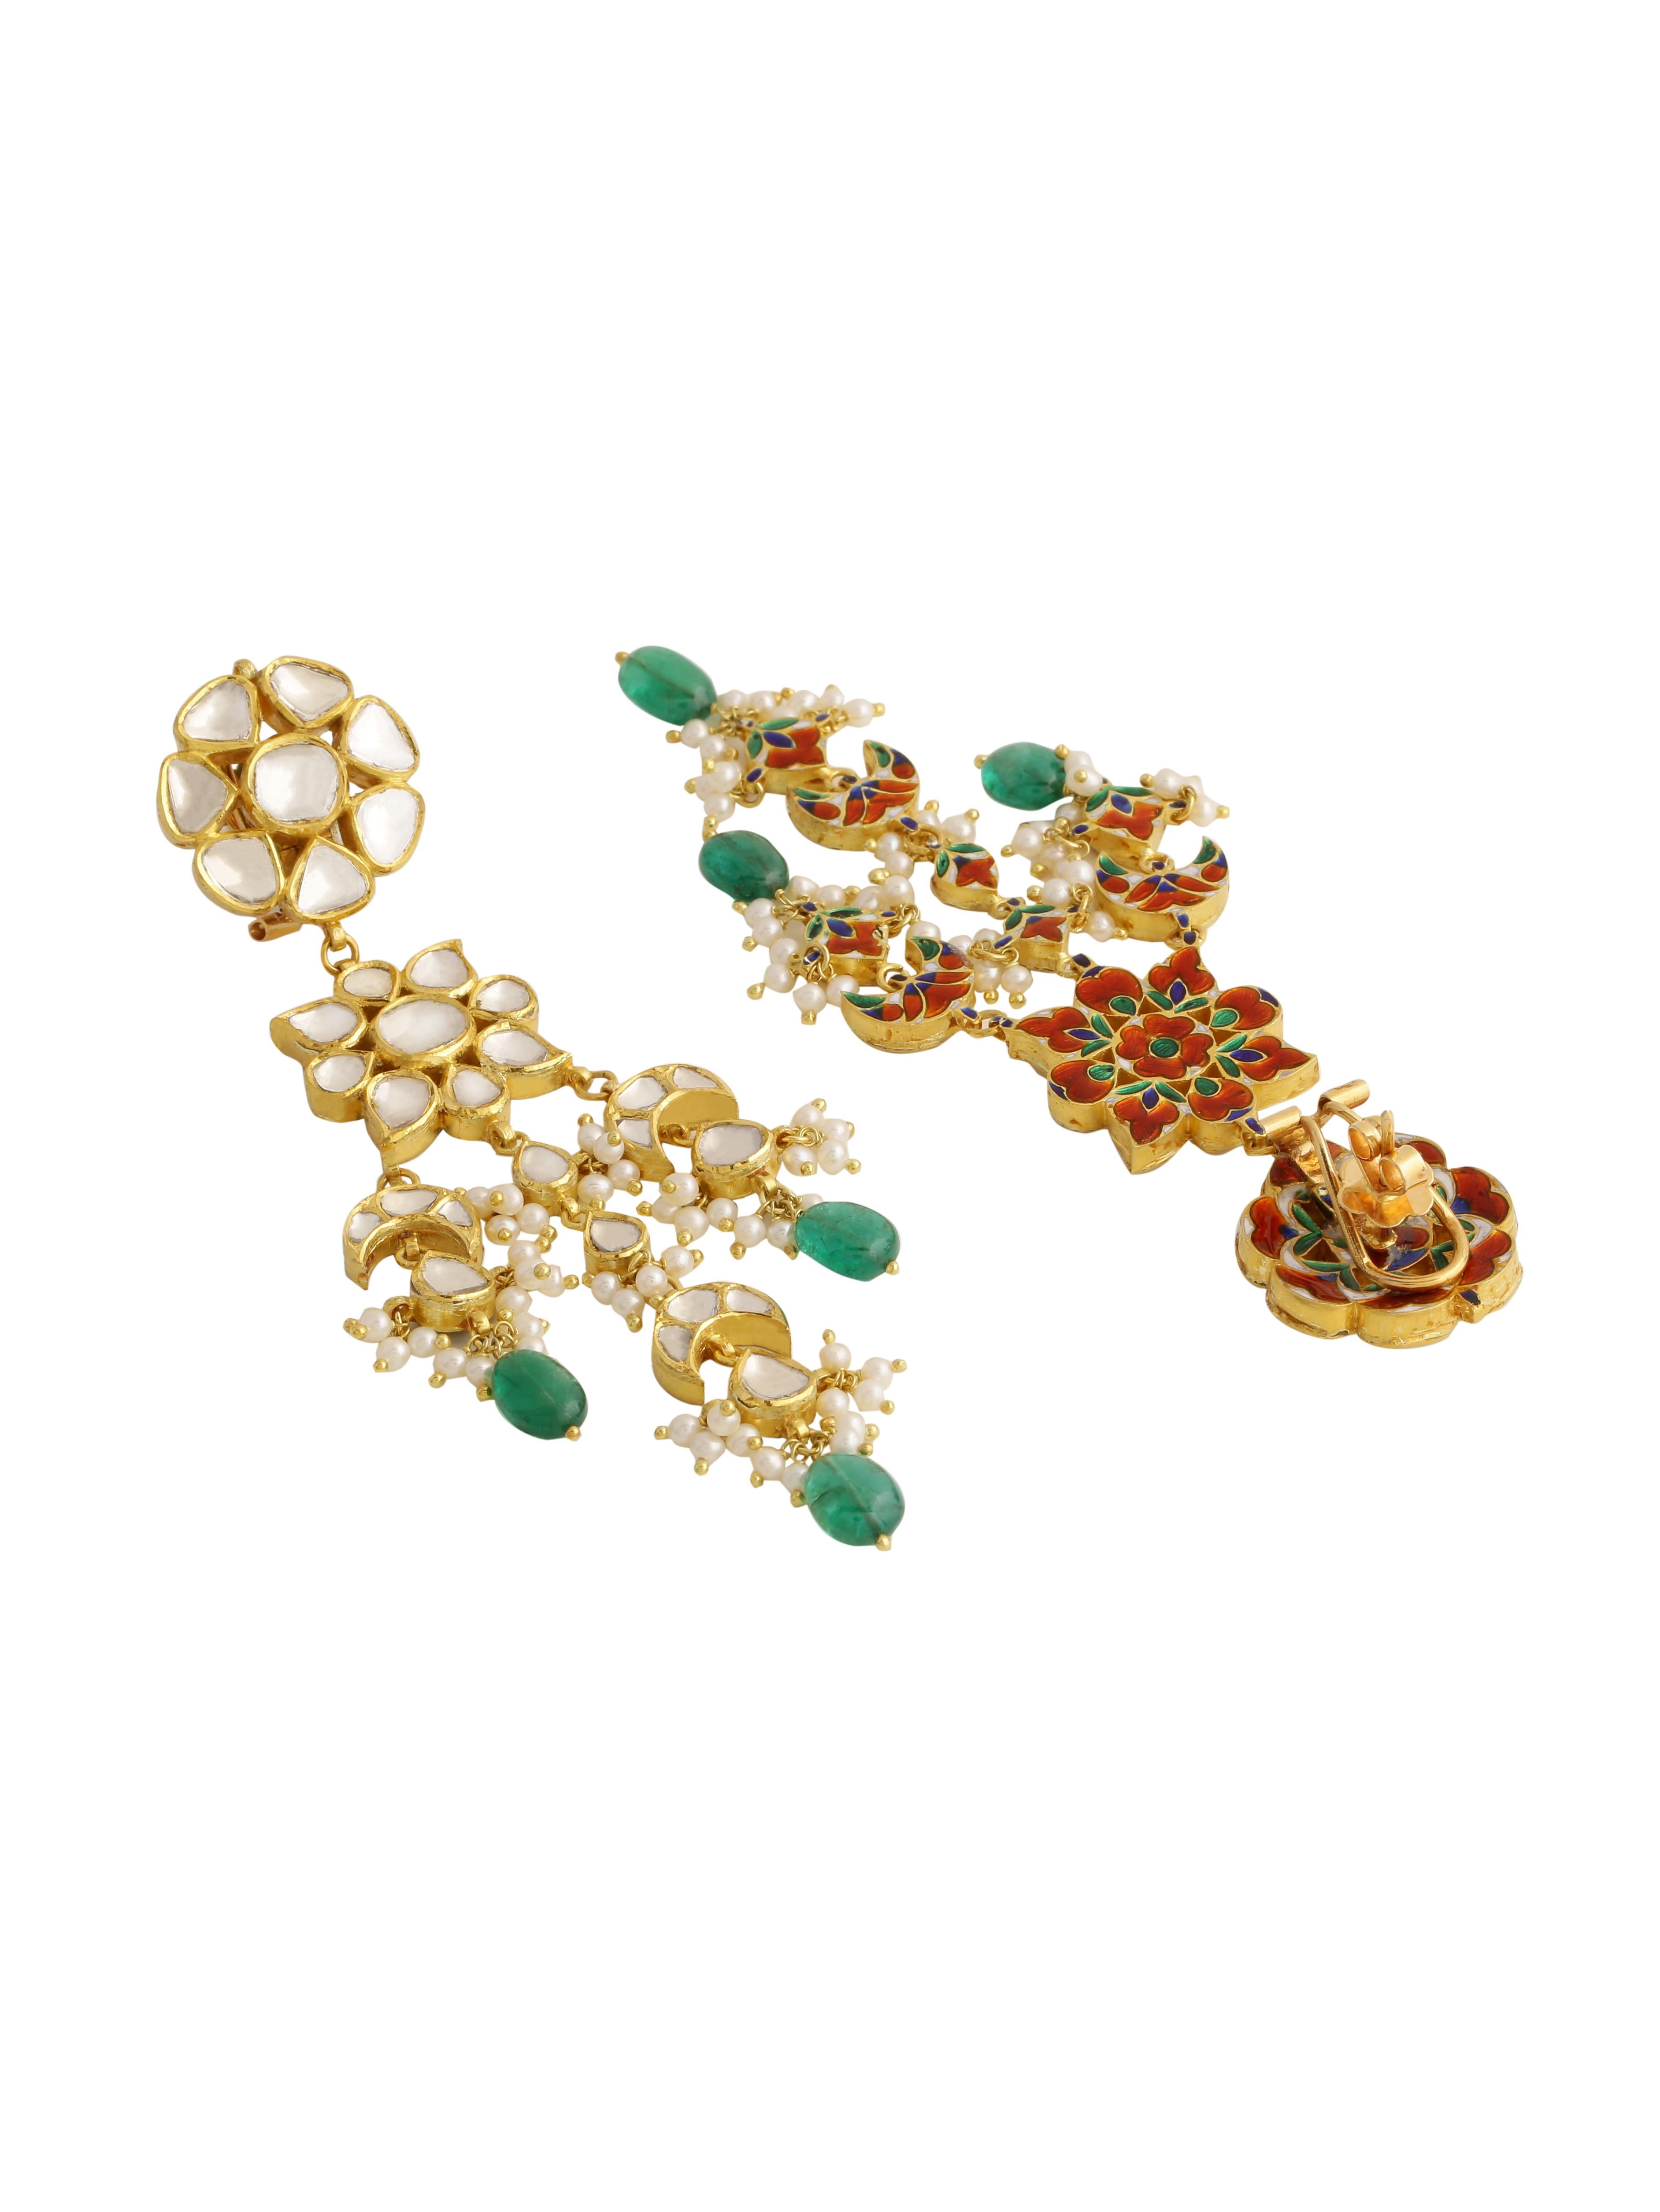 Uncut Diamonds and Emerald Chandelier Earring Handcrafted in 18K Gold with Fine Enamel For Sale